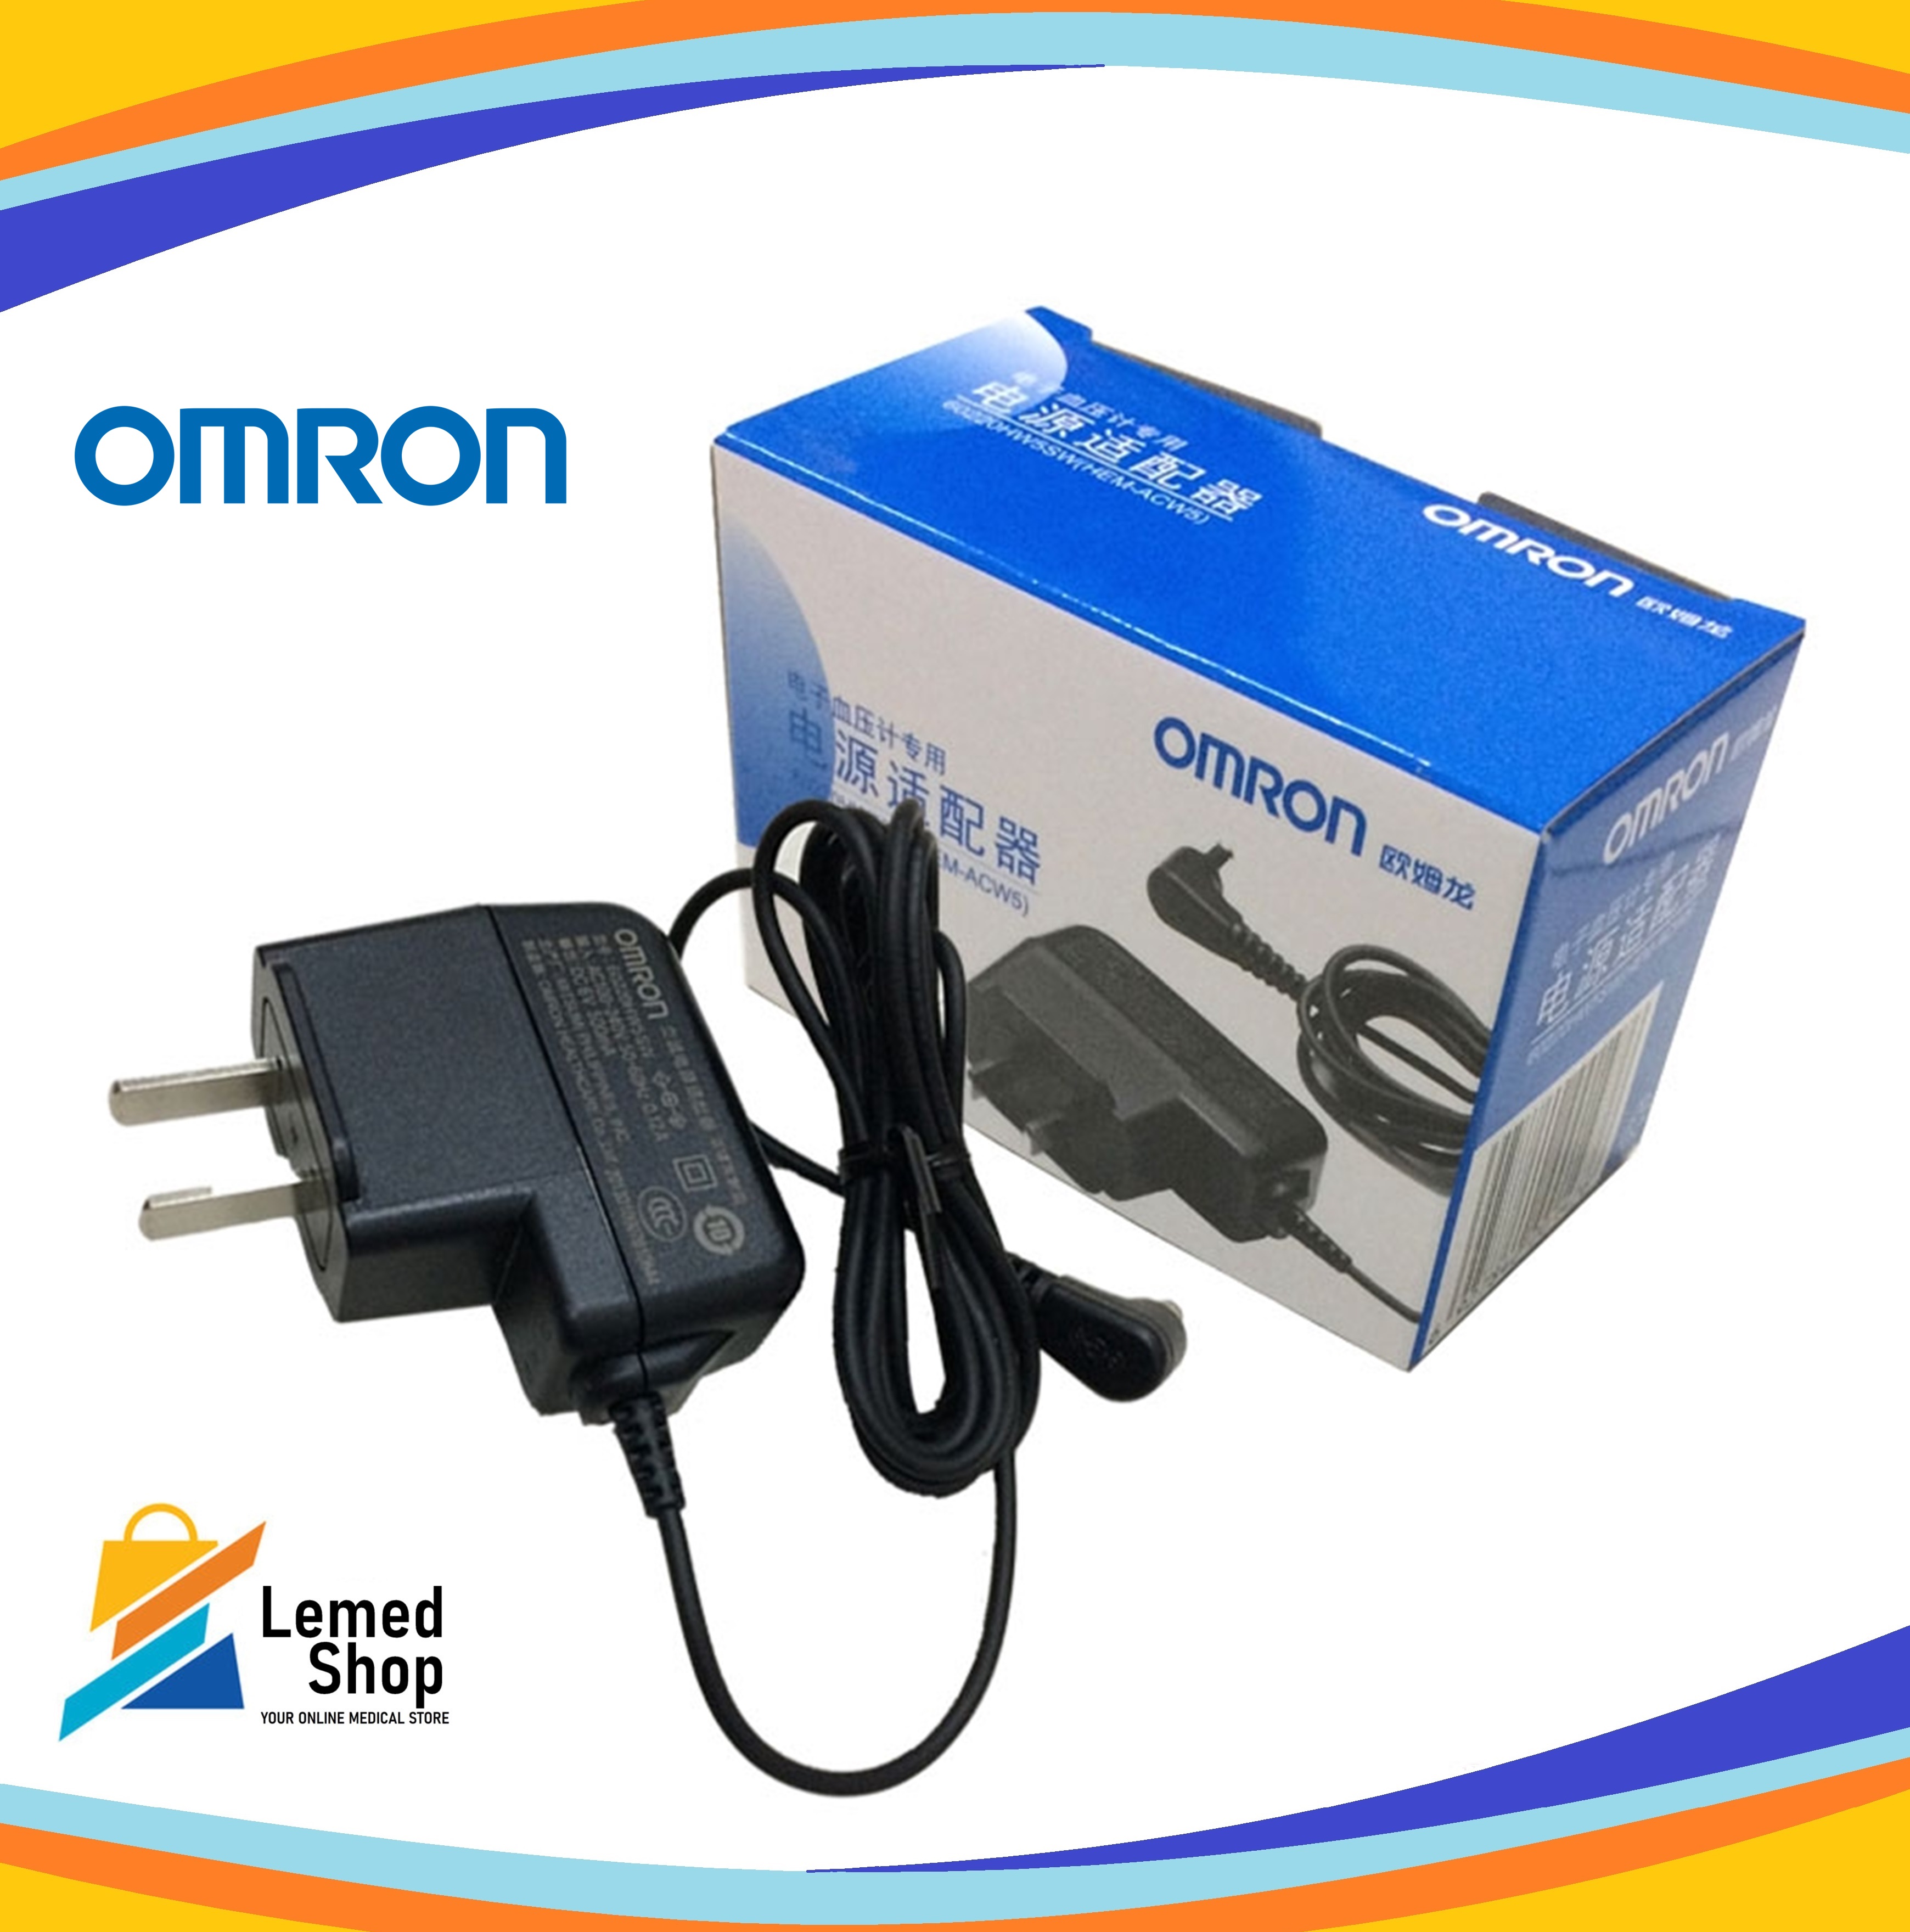 T POWER Charger Compatible for Omron 5 Silver BP5250 Gold  BP5350,HEM-71571T-Z 7 10 Series BP742N BP760N BP761 BP785N BP786N Upper Arm  Blood Pressure